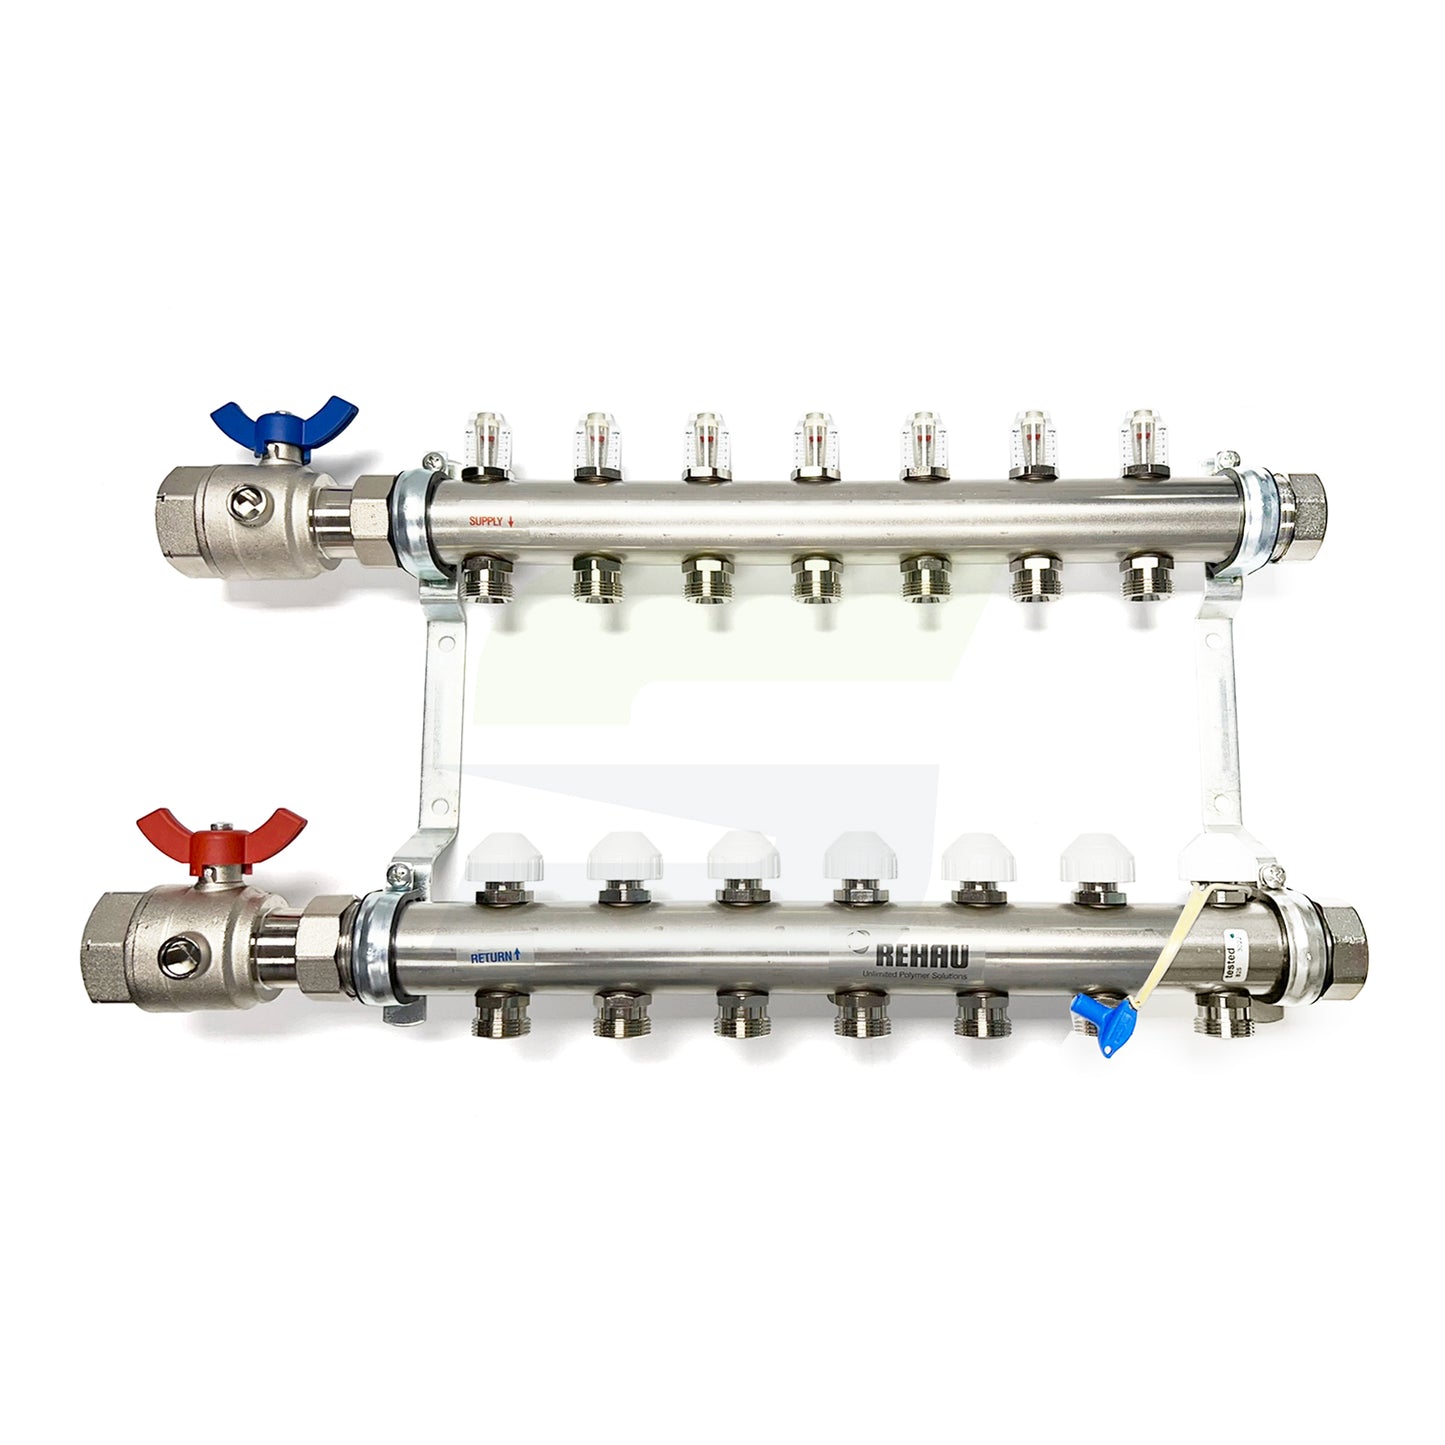 343378-001 - PRO-BALANCE 1-1/4" Stainless Steel Manifold With Gauges - 7 Outlet